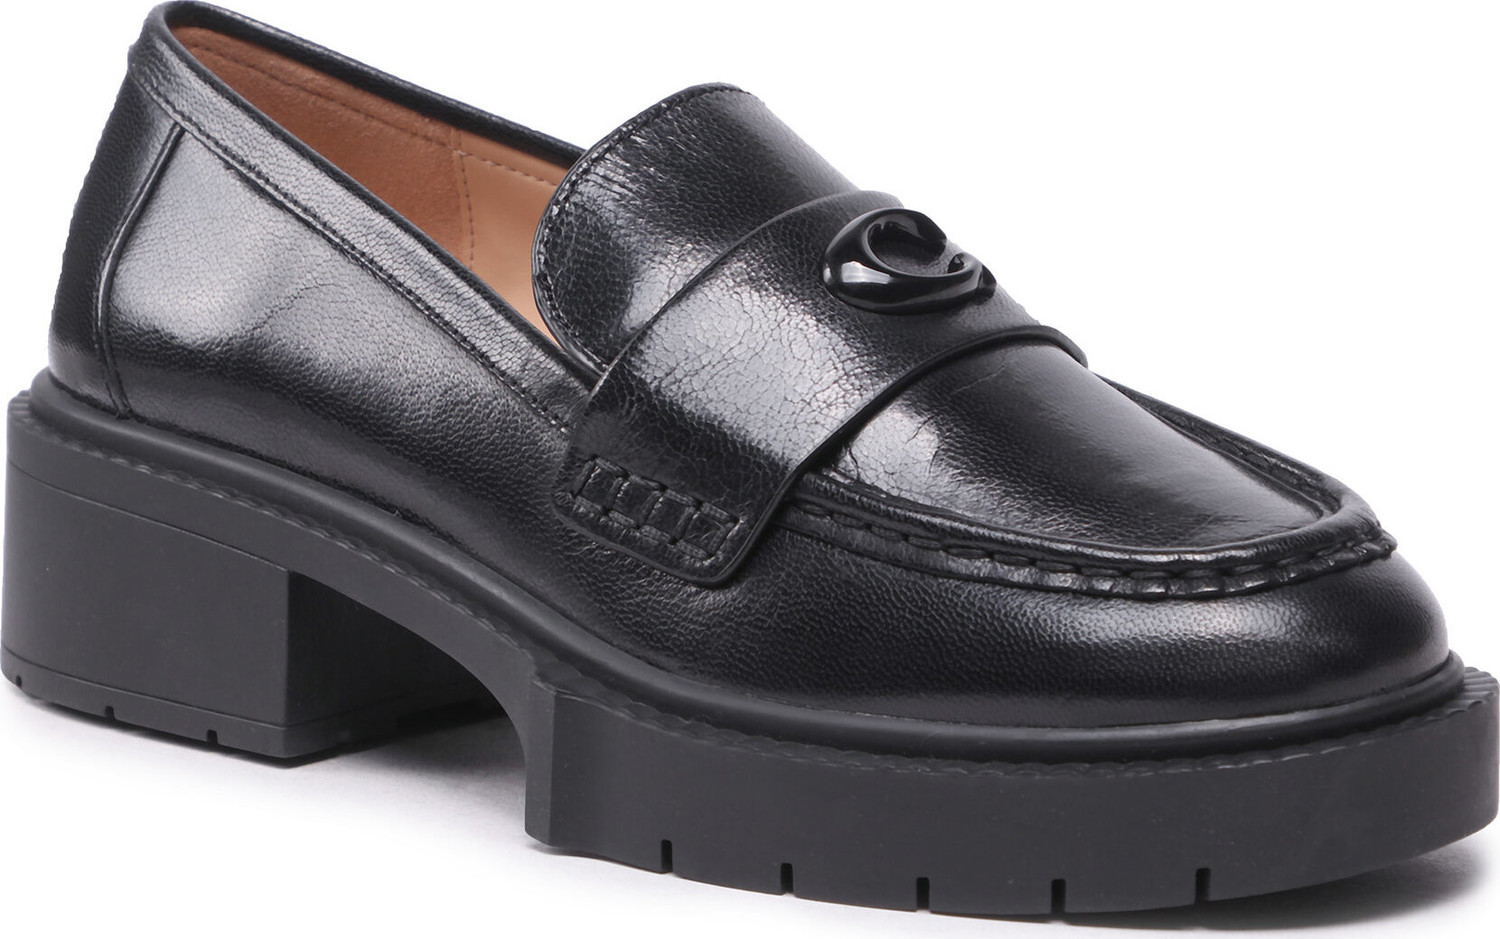 Loafersy Coach Leah Loafer CB990 Black